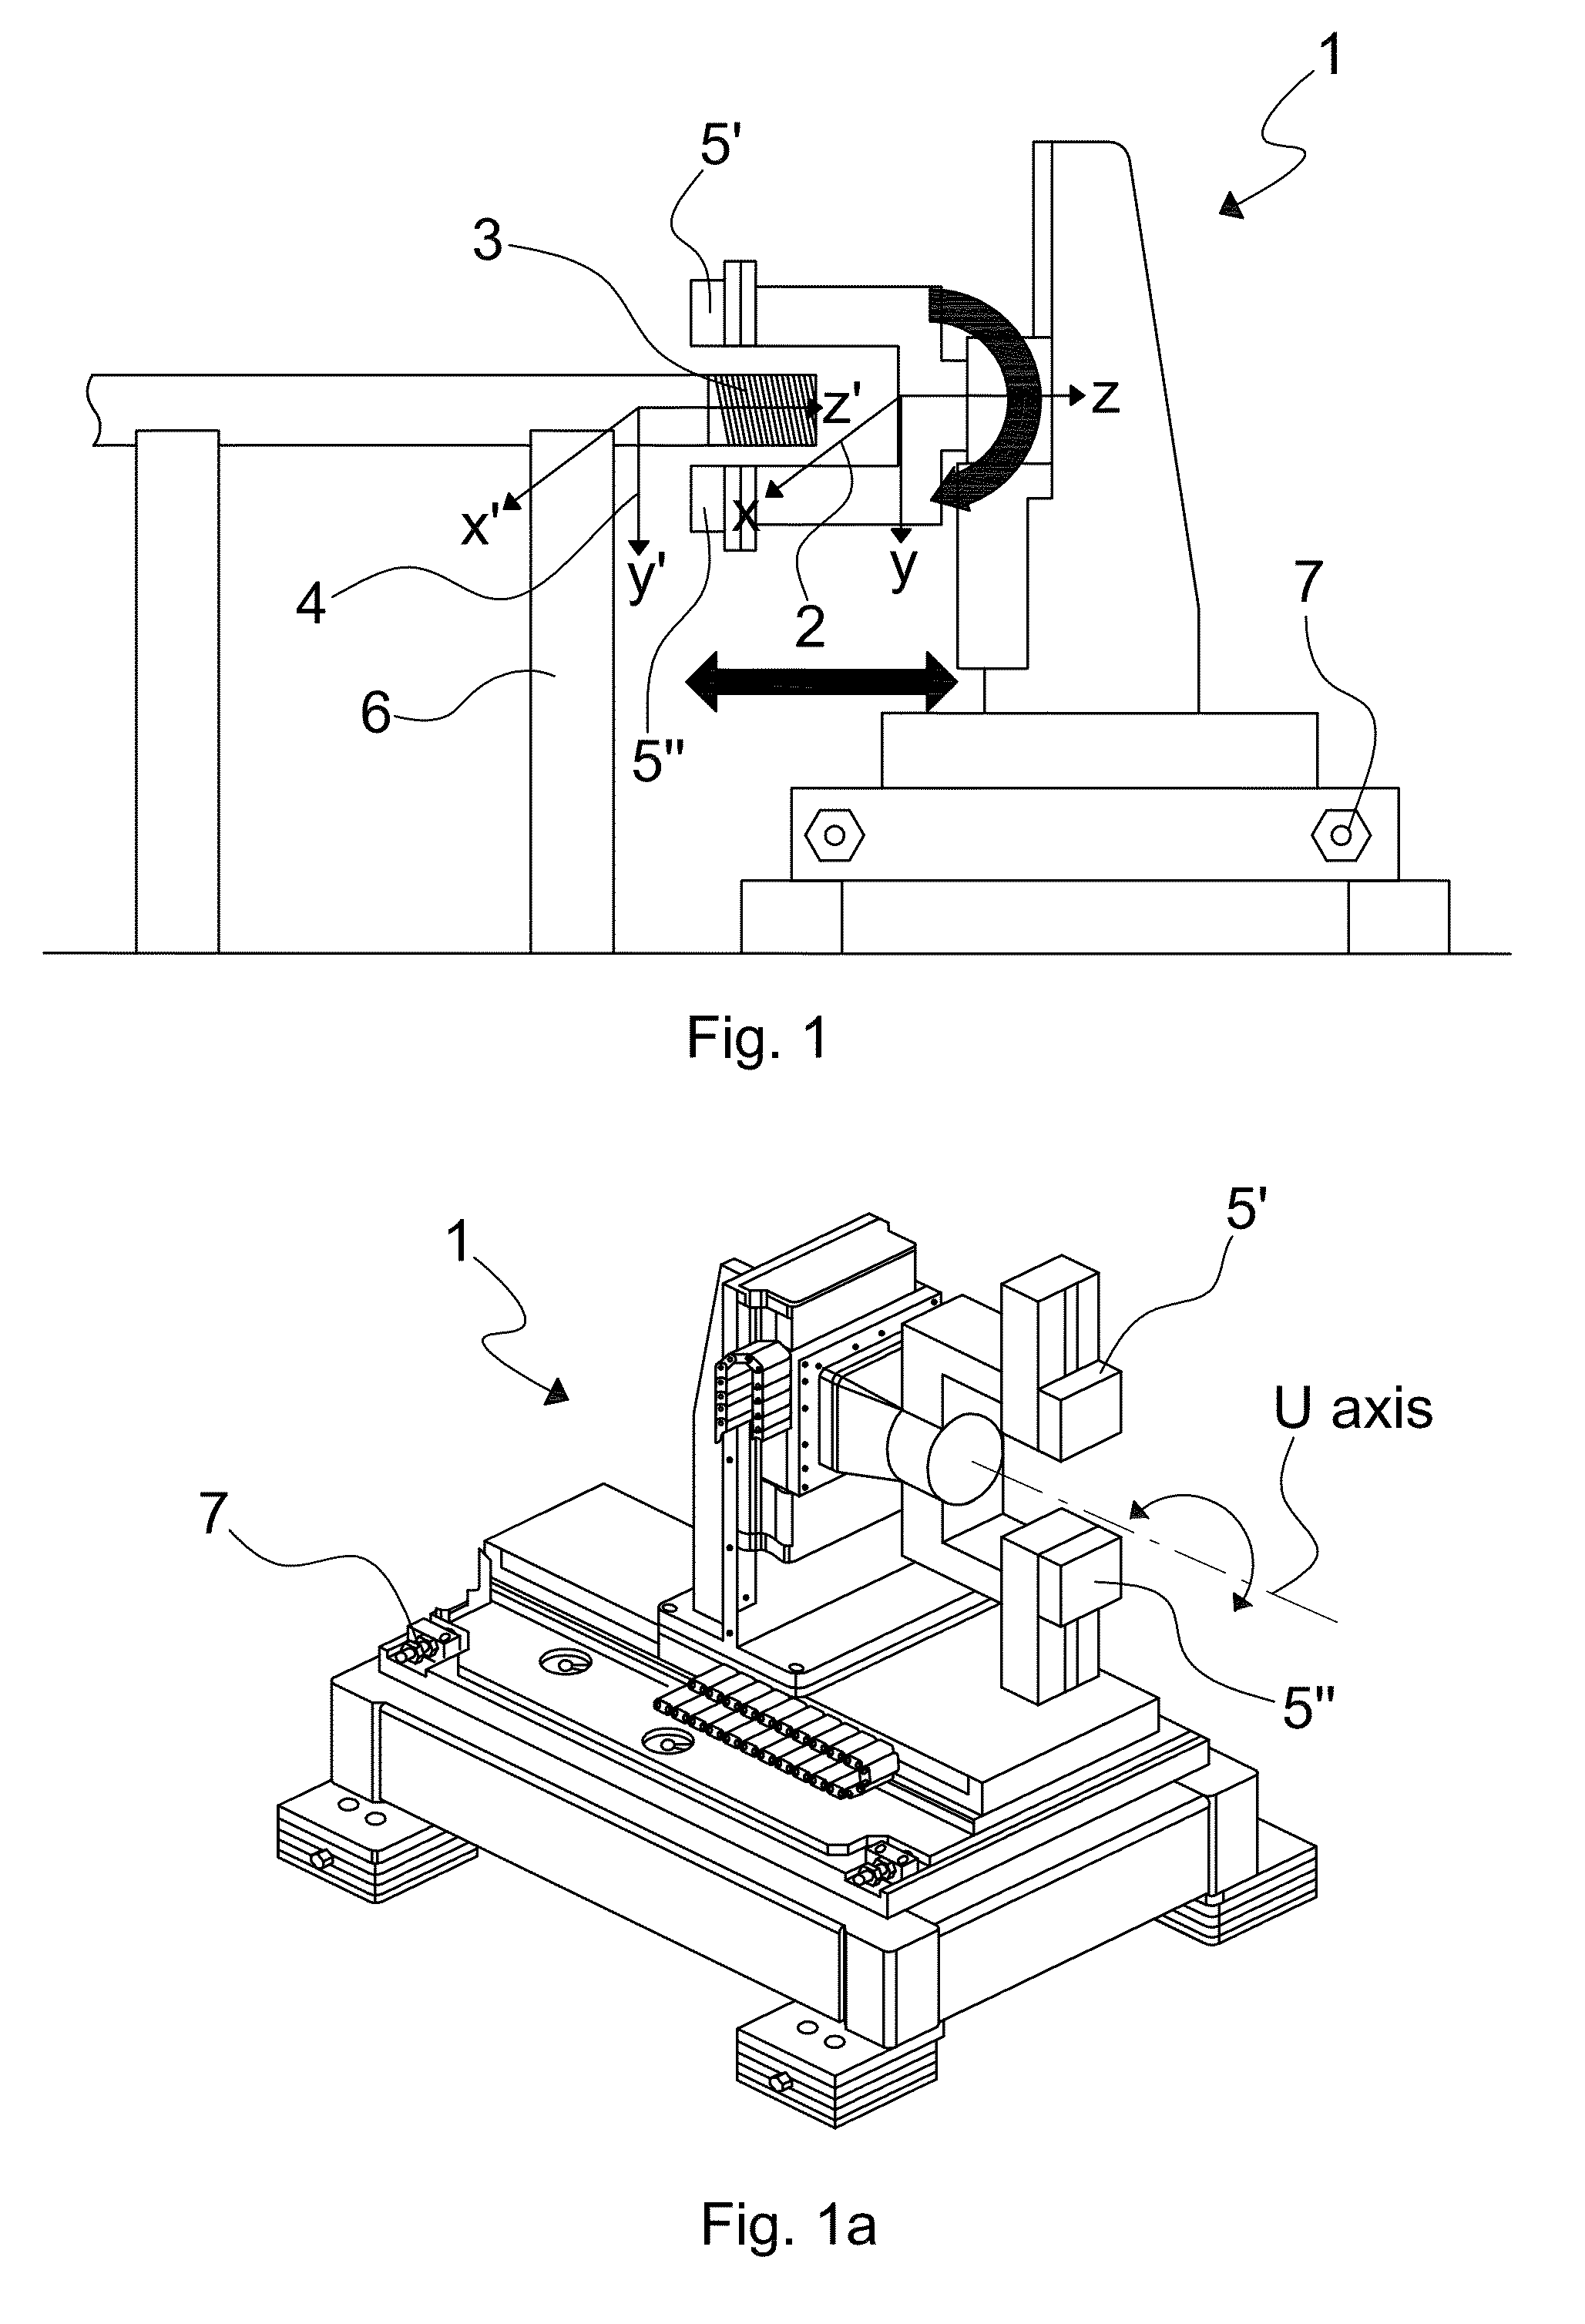 Systems and methods for measurement of geometrical parameters of threaded joints